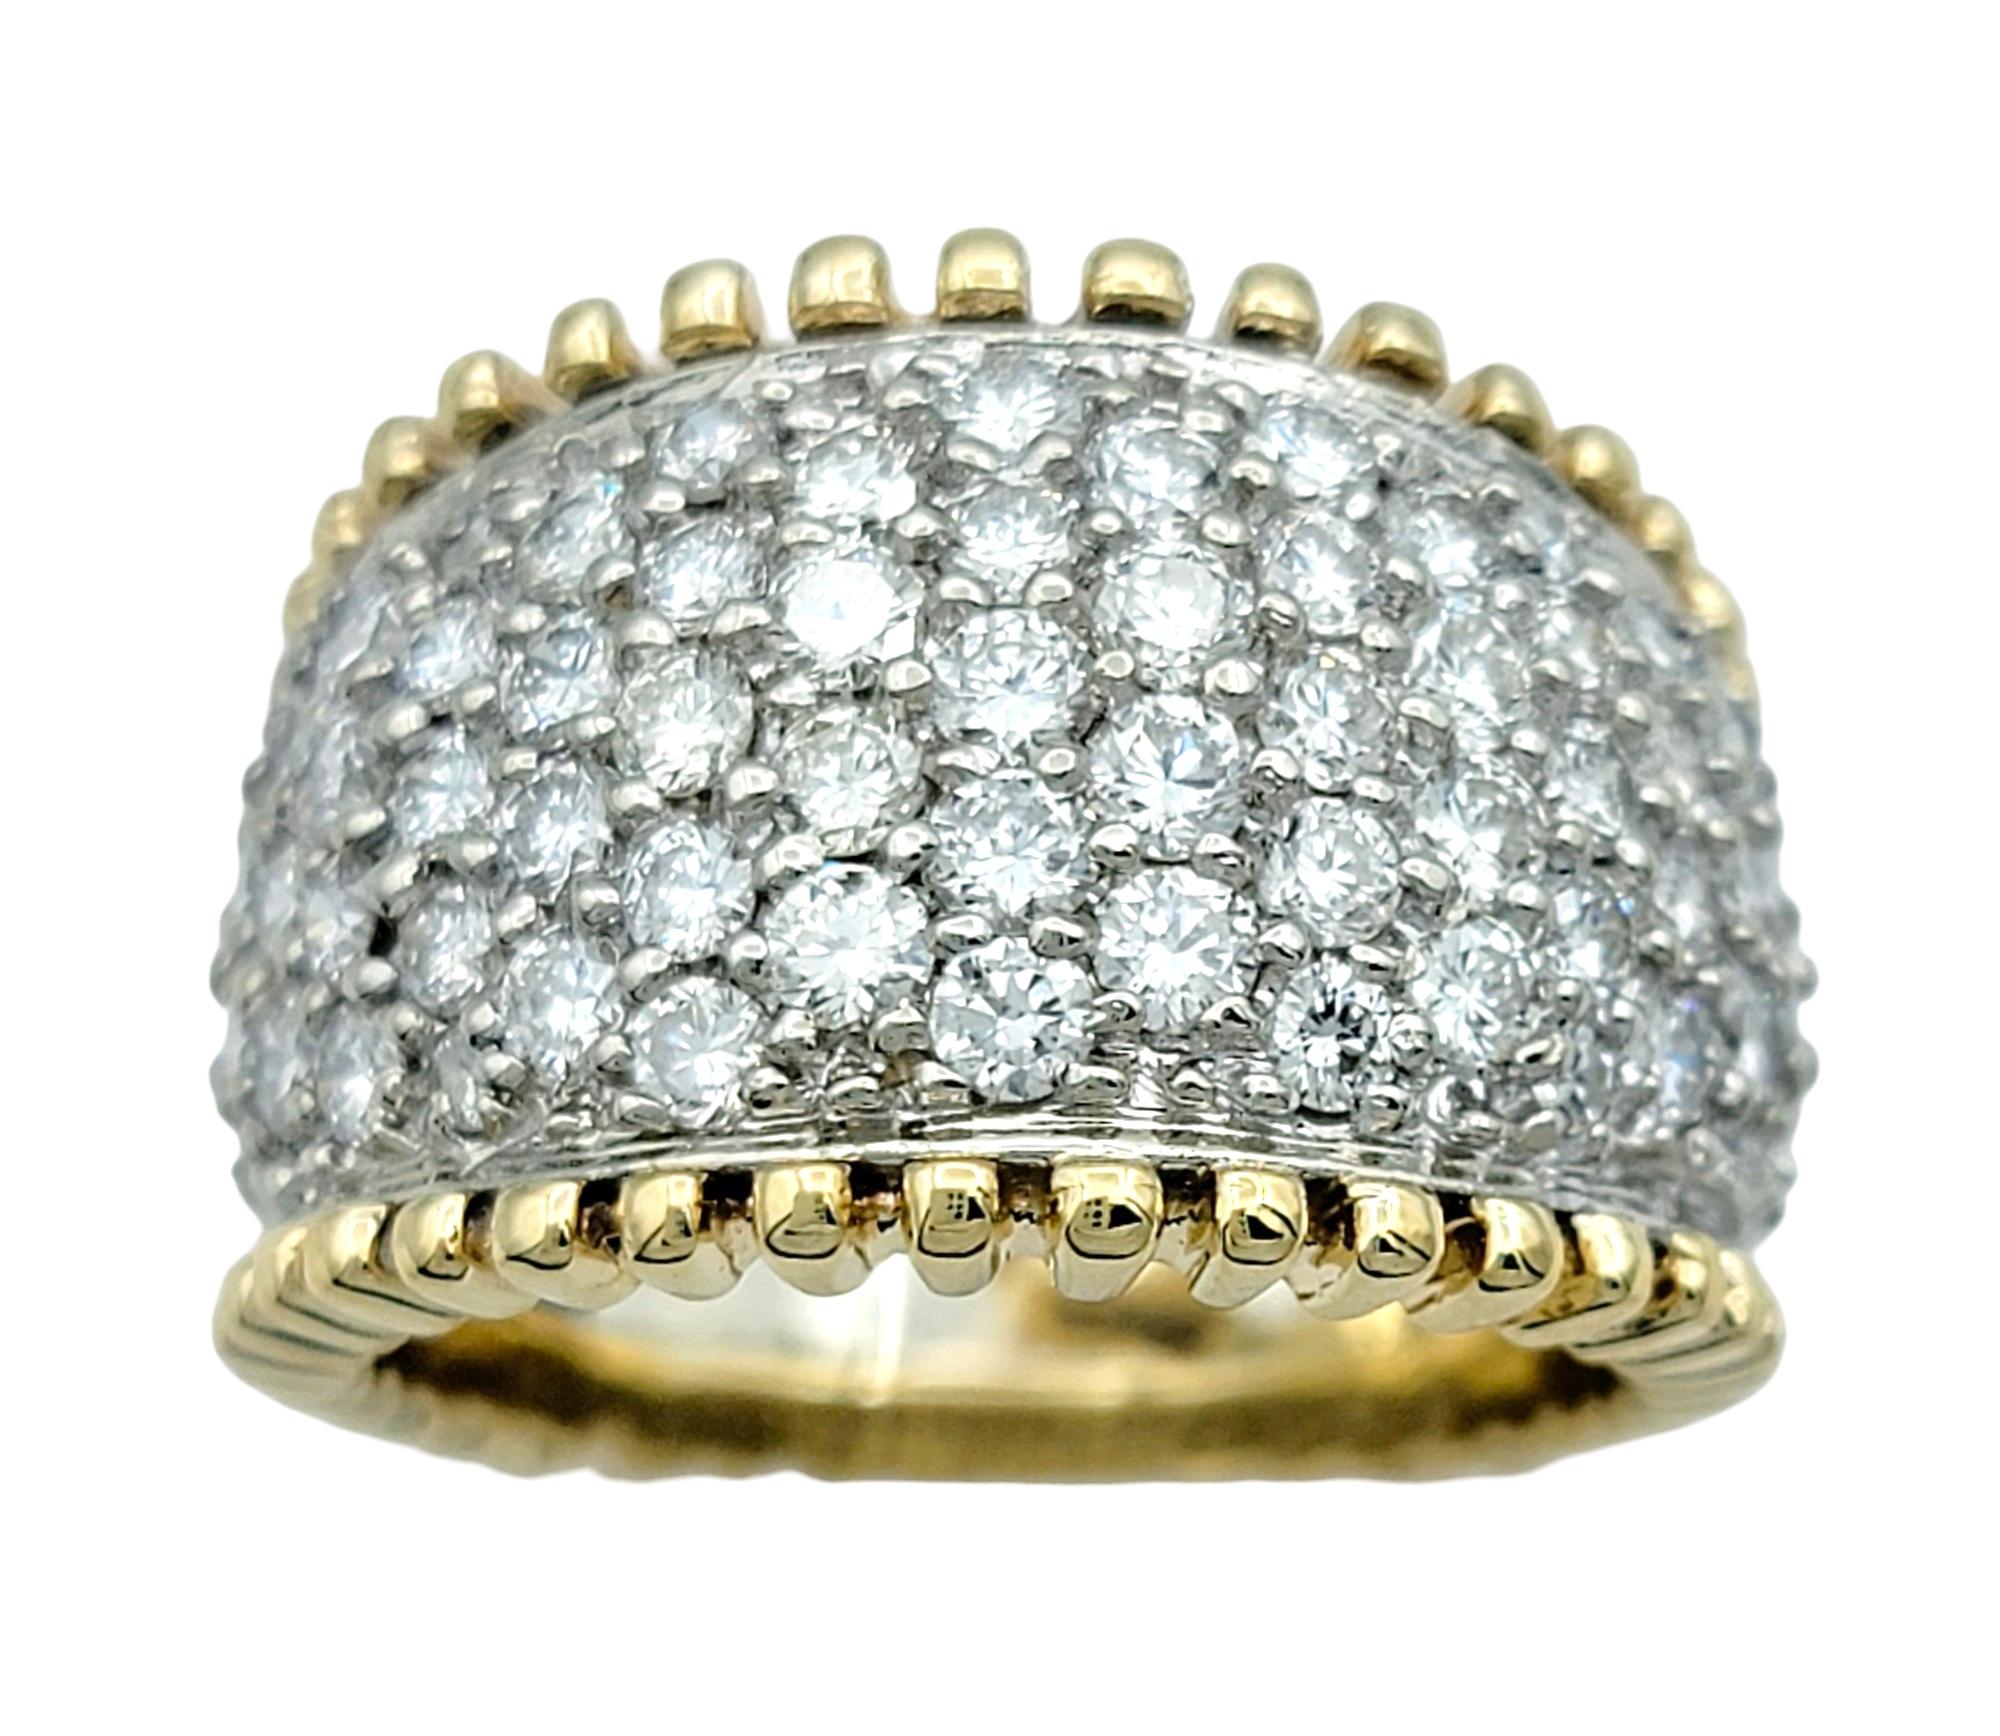 Ring Size: 7

This stunning diamond cluster dome ring exudes elegance with its intricate design and contrasting metals. Set in 14 karat white gold, the dazzling diamonds form a radiant cluster at the center of the ring, capturing and reflecting